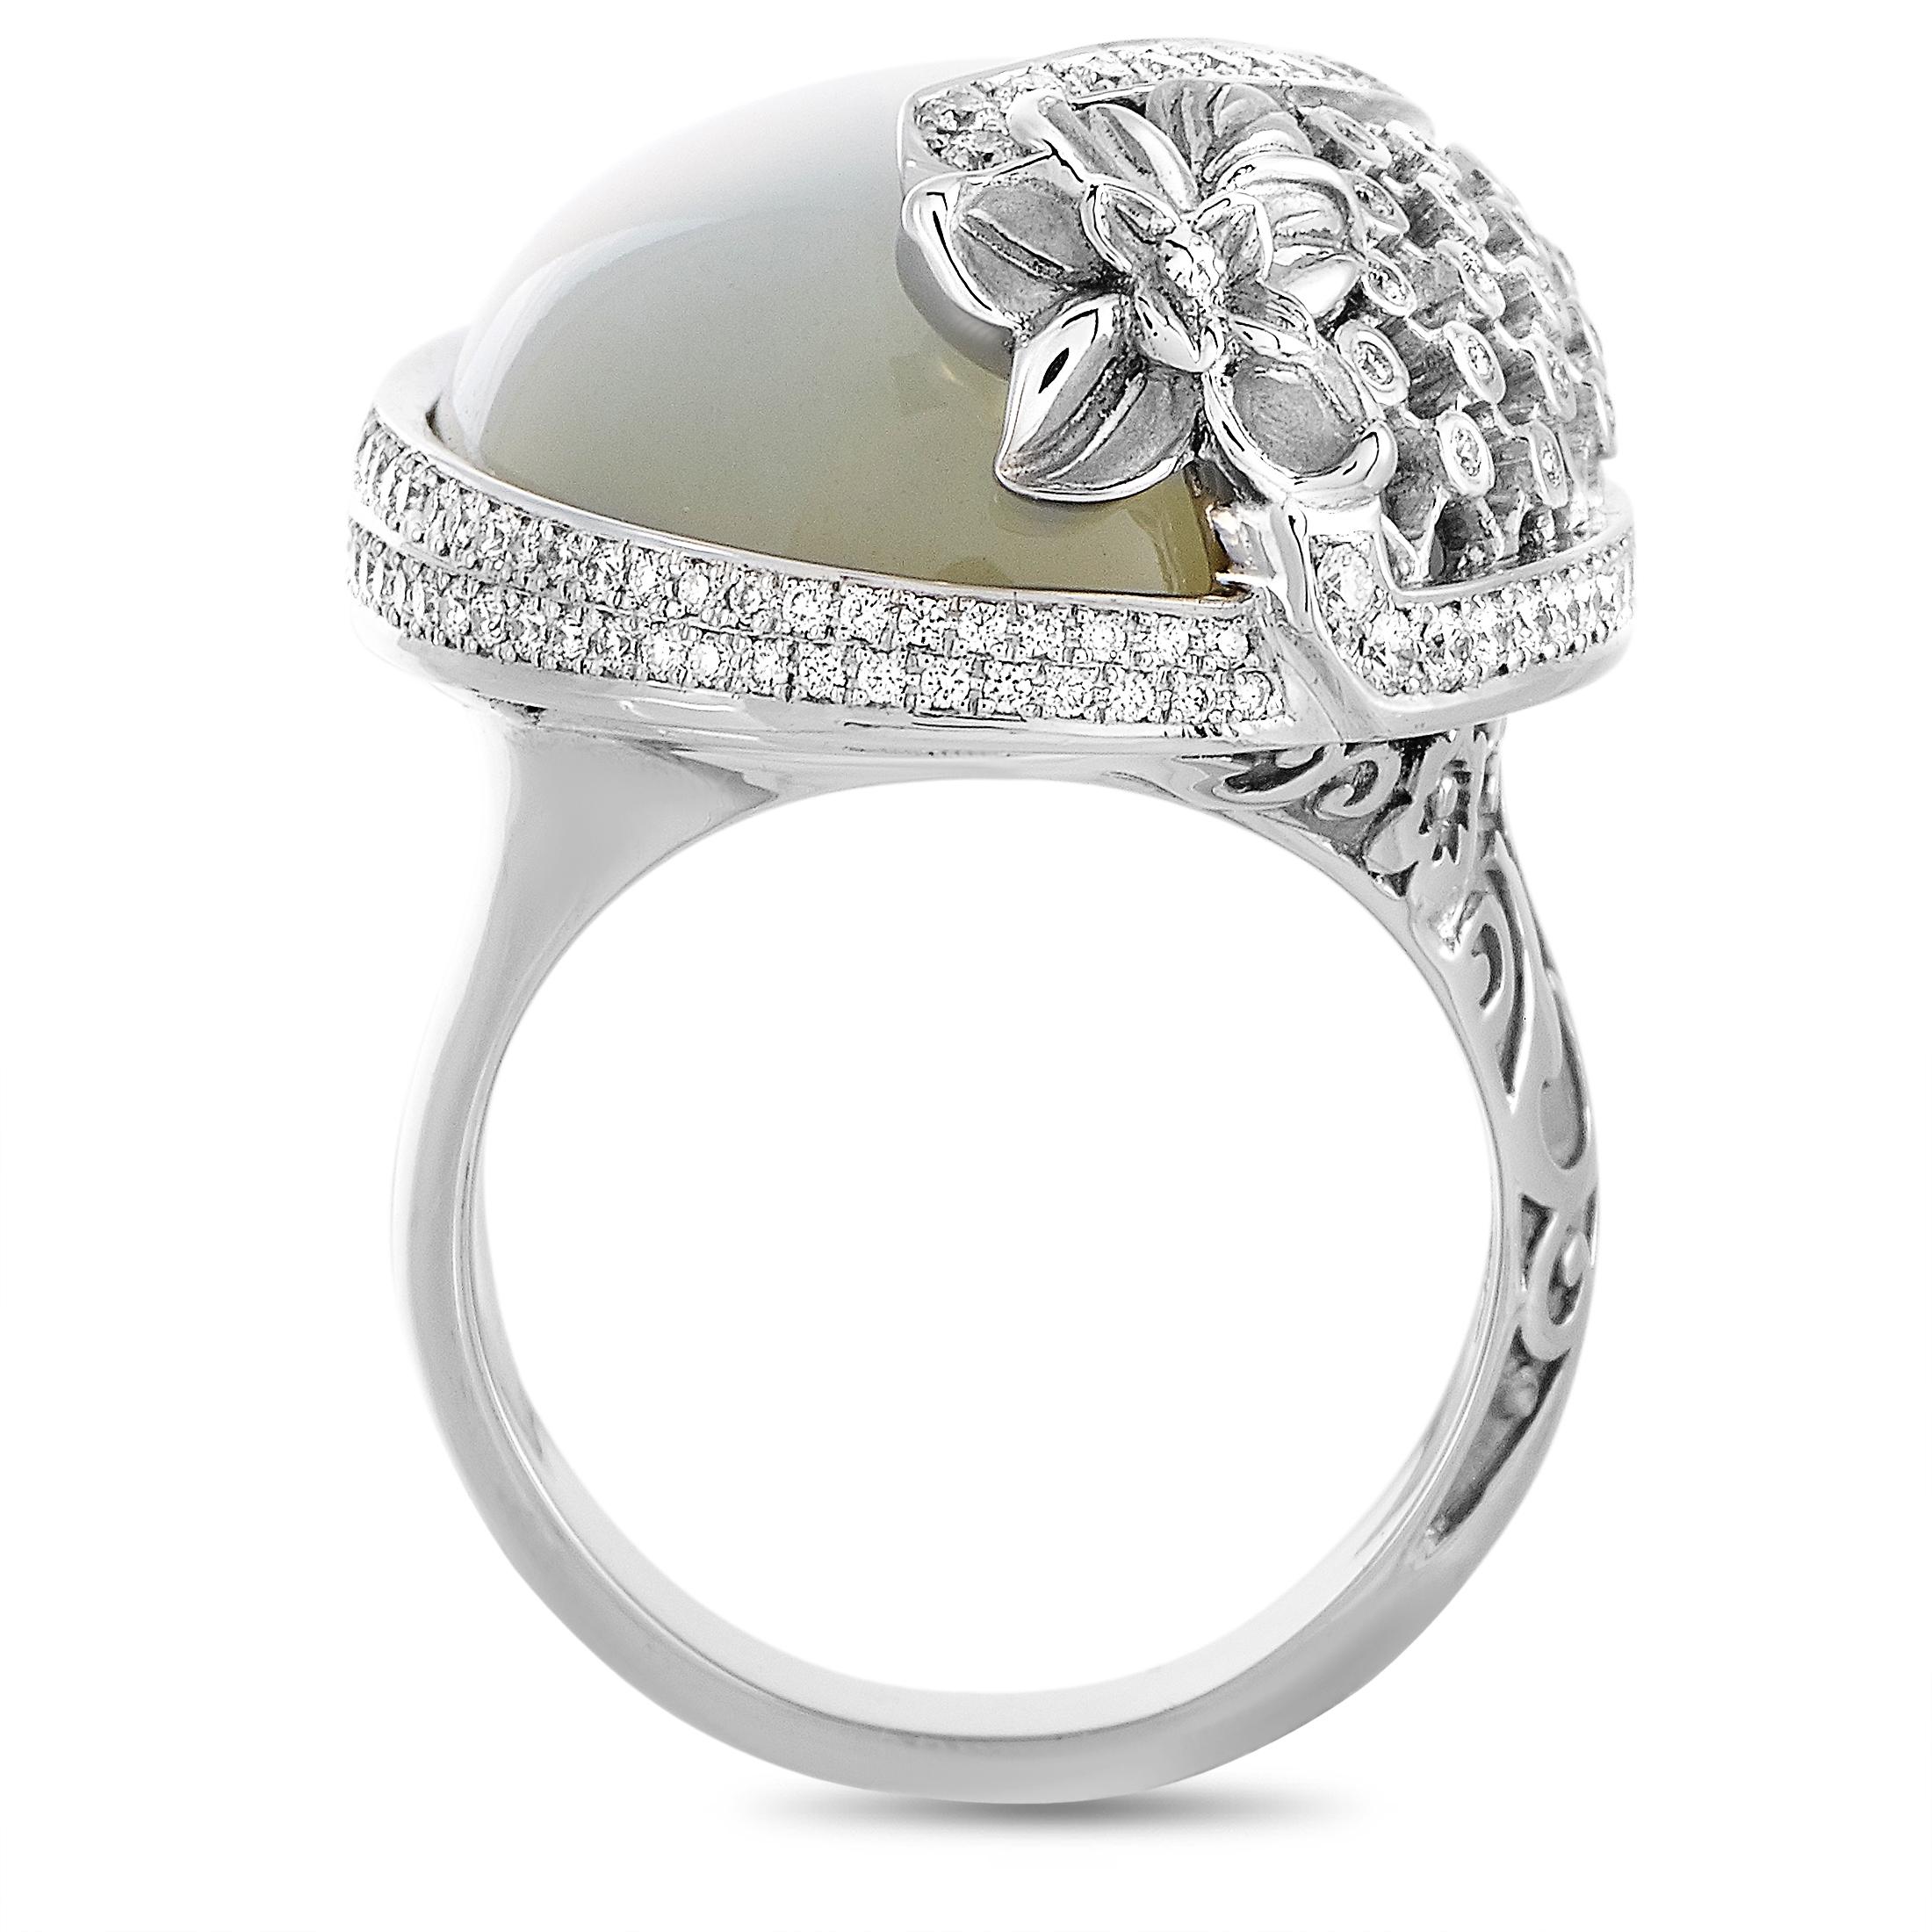 The Carrera y Carrera “Sierpes Maxi” ring is made of 18K white gold and weighs 28.3 grams, boasting band thickness of 5 mm and top height of 10 mm, while top dimensions measure 33 by 30 mm. The ring is embellished with a moonstone and a total of